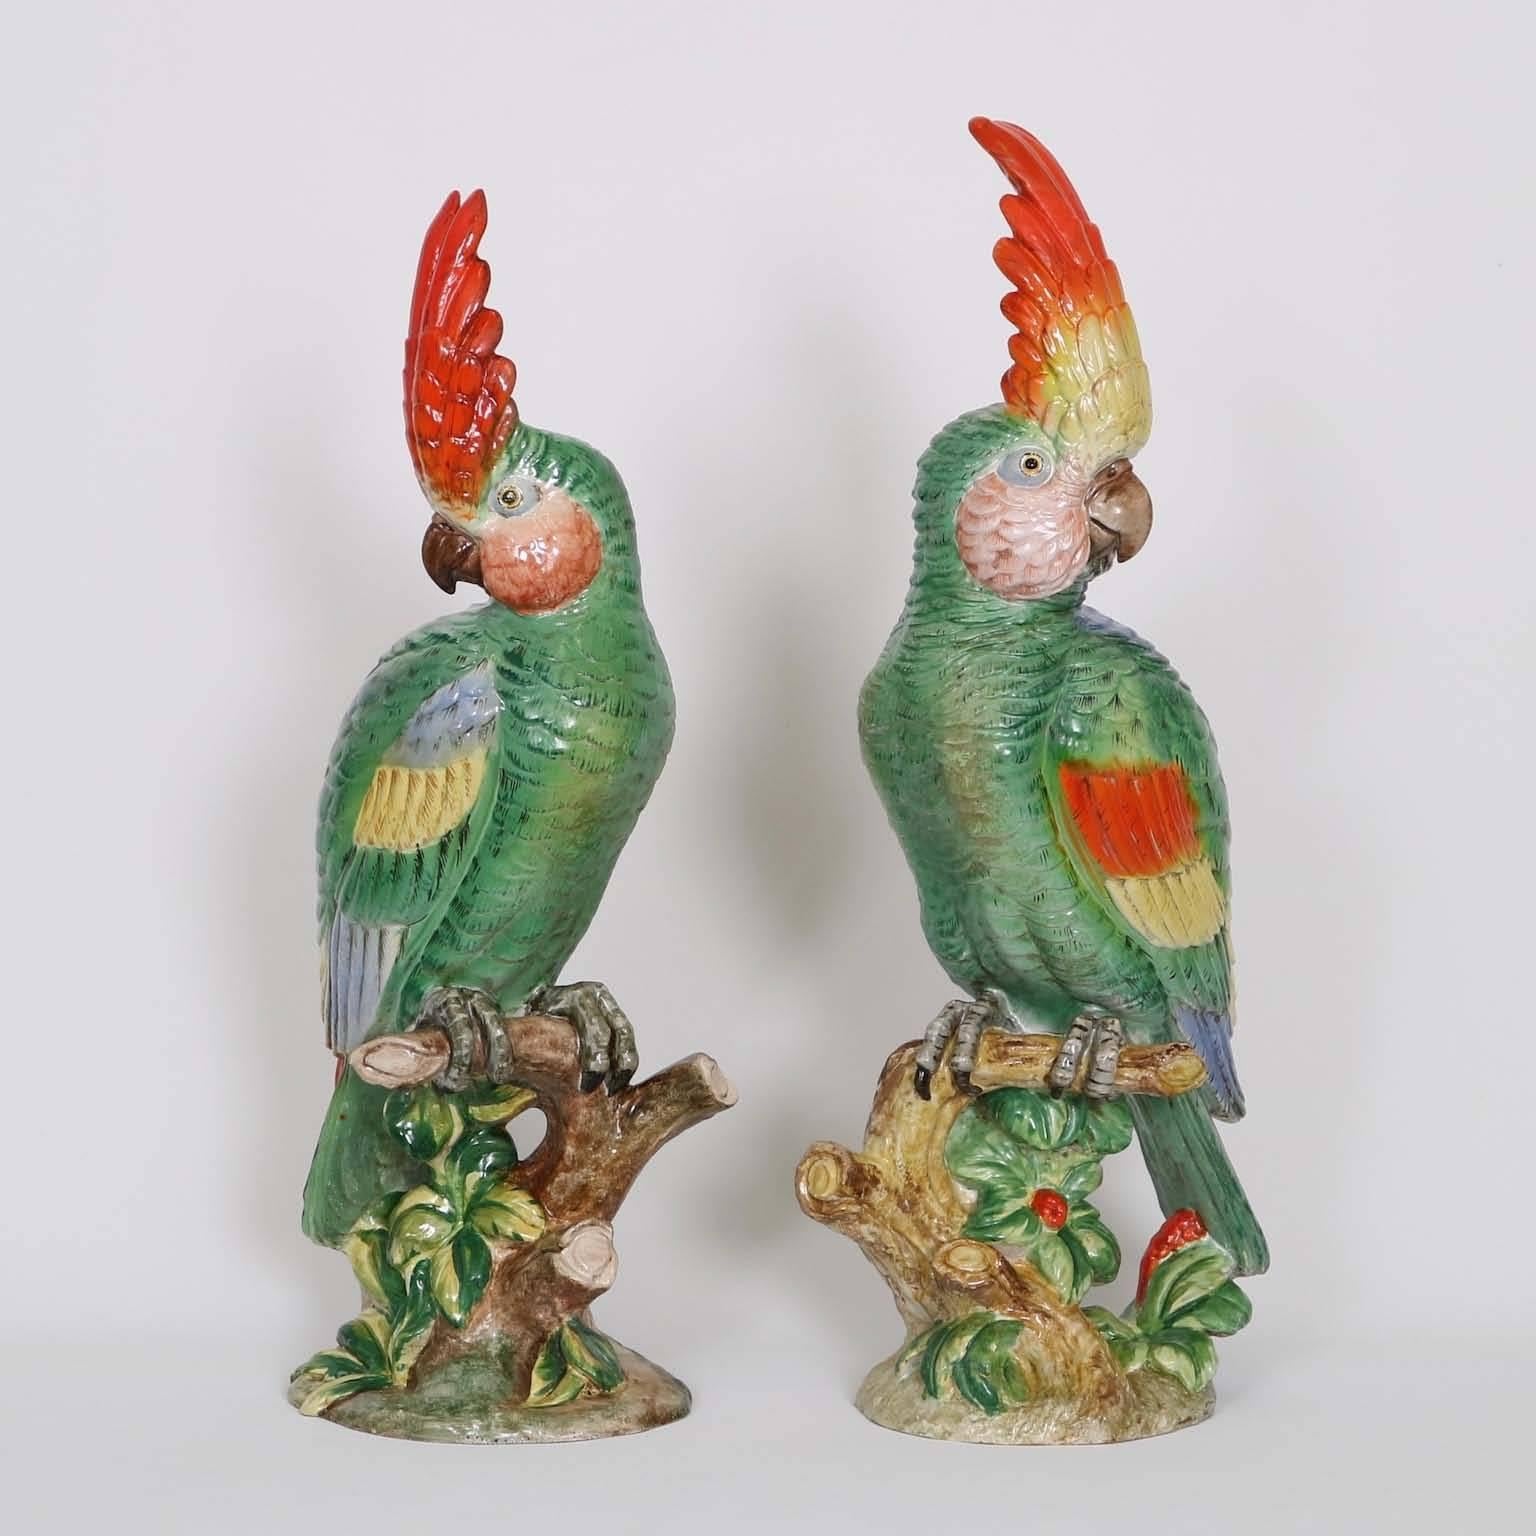 A spectacular pair of Mid-Century Italian Majolica parrots, produced circa 1950s, with a beautiful combination of colors, artist signed. Excellent vintage condition, wear consistent with age and use.